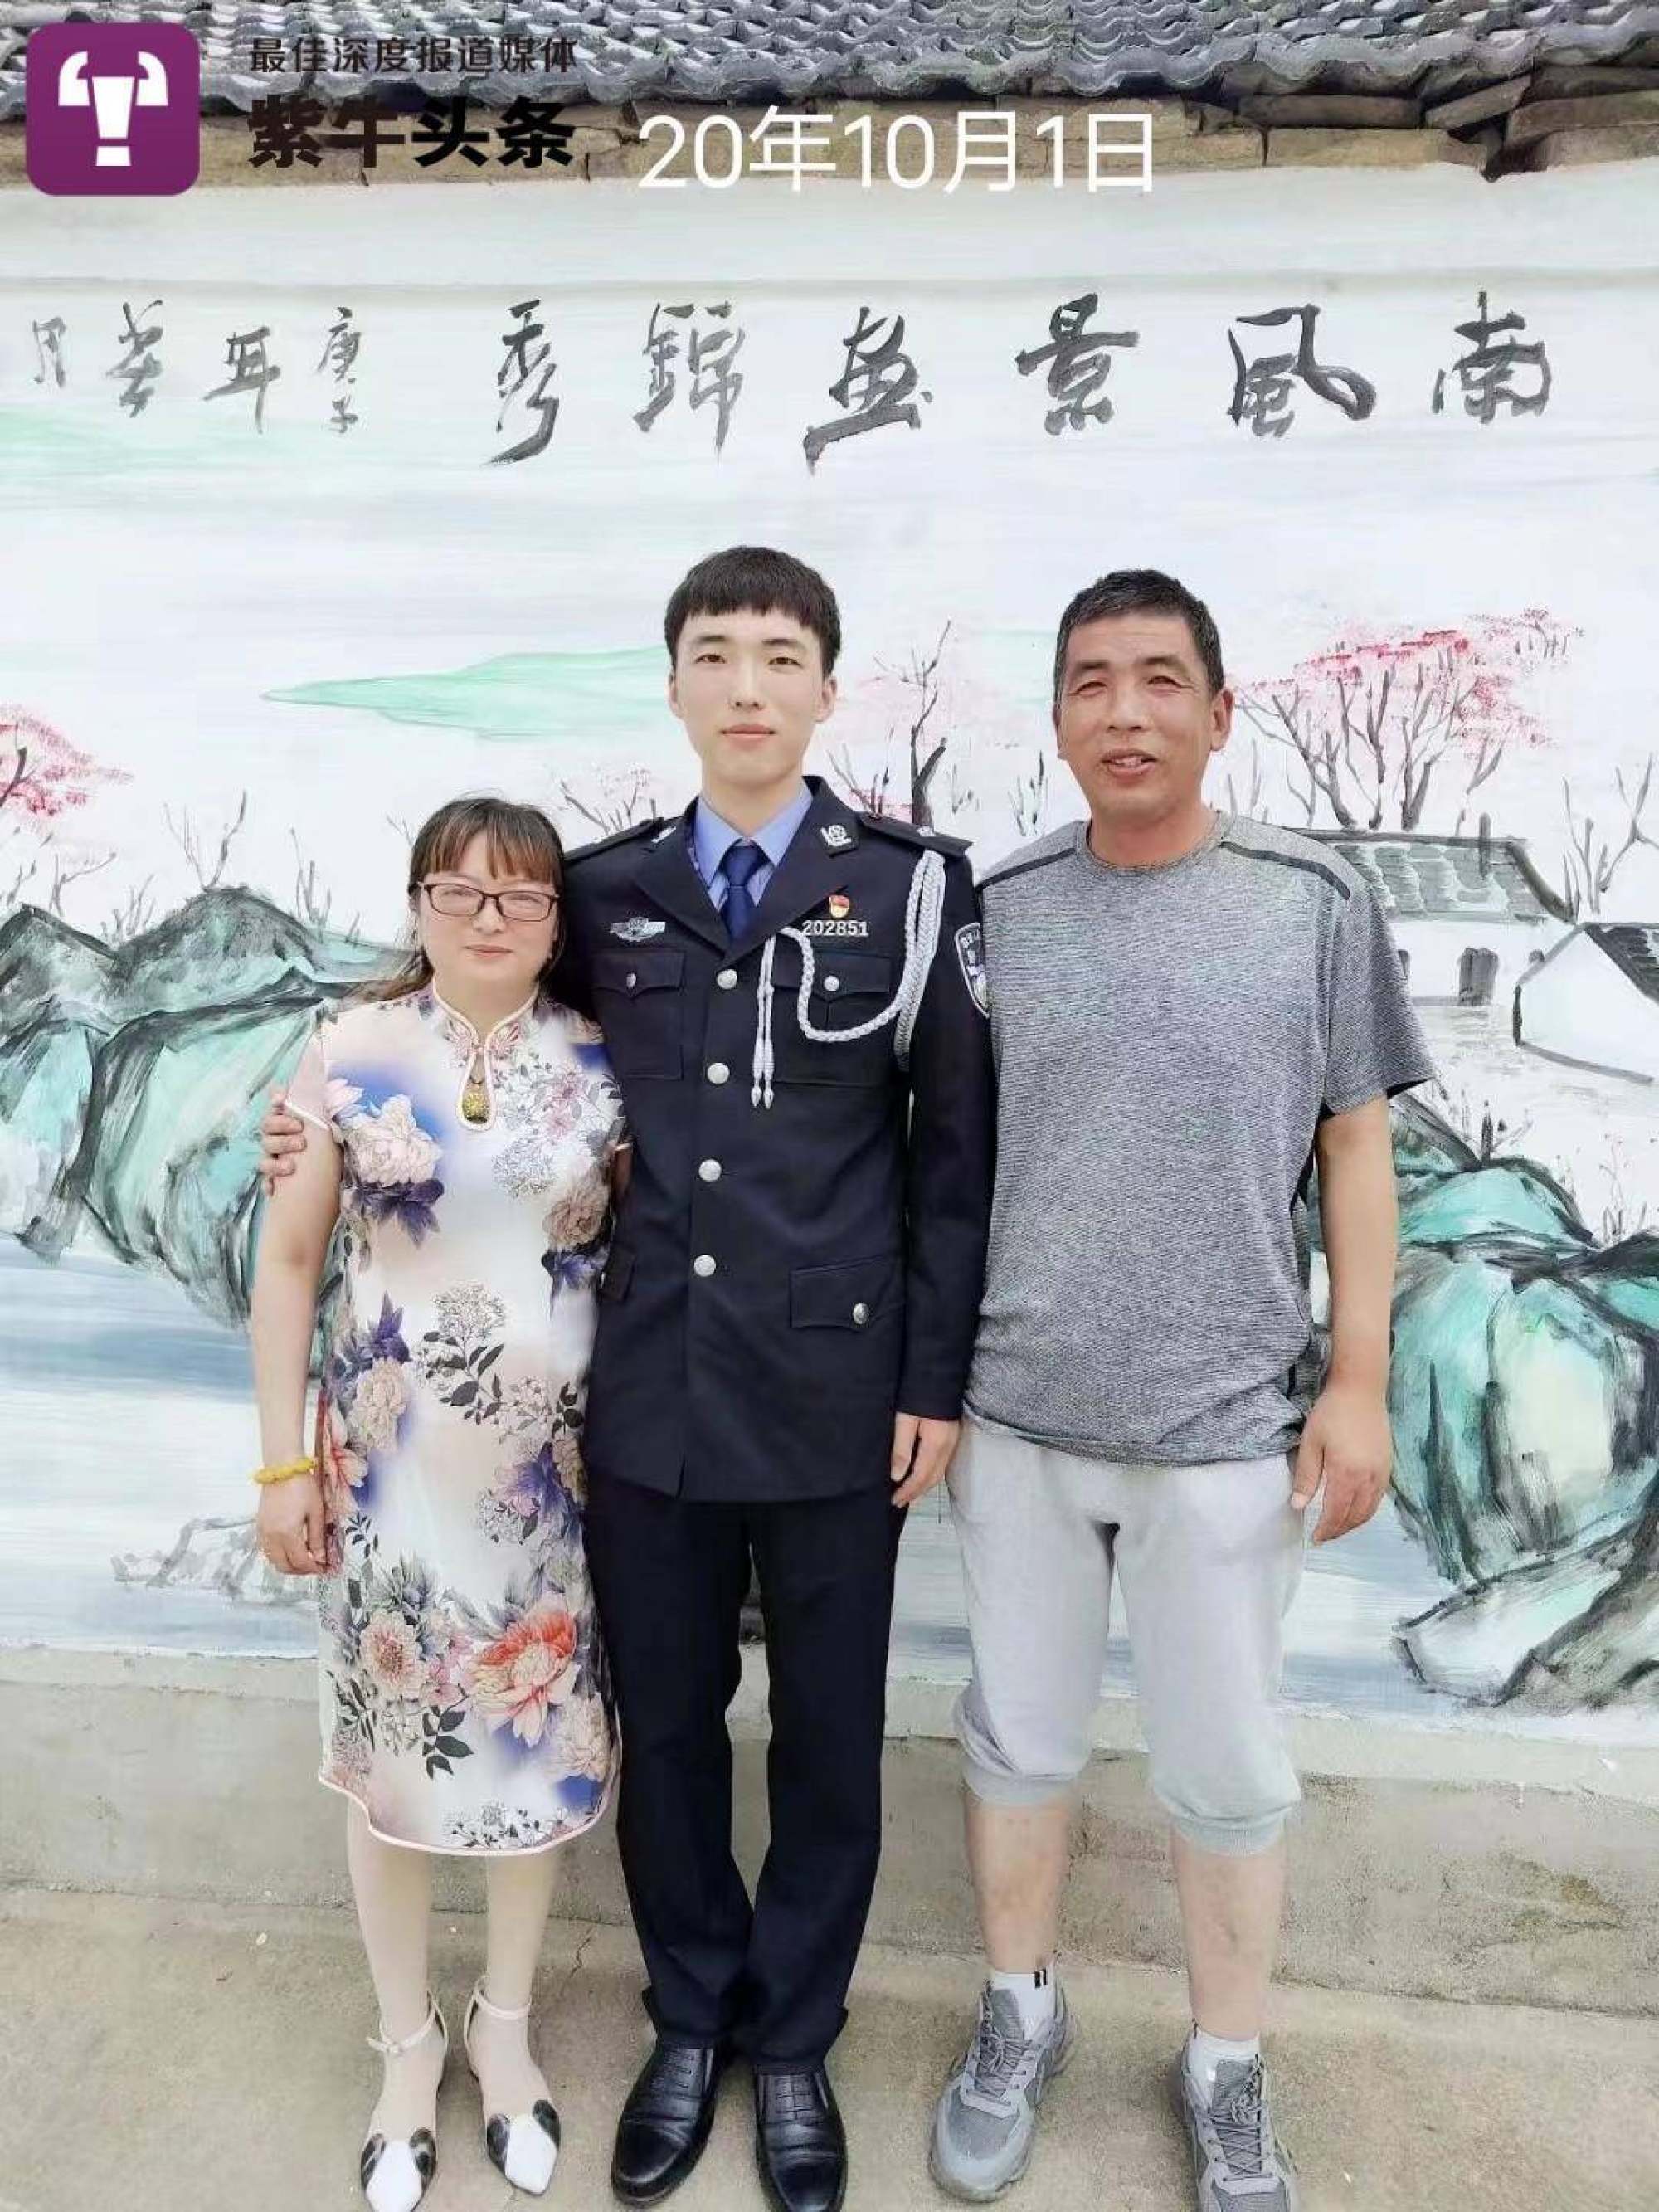 Dou and her husband with their son Chen, centre, before he died 2 years ago in the line of duty. Photo: Sohu